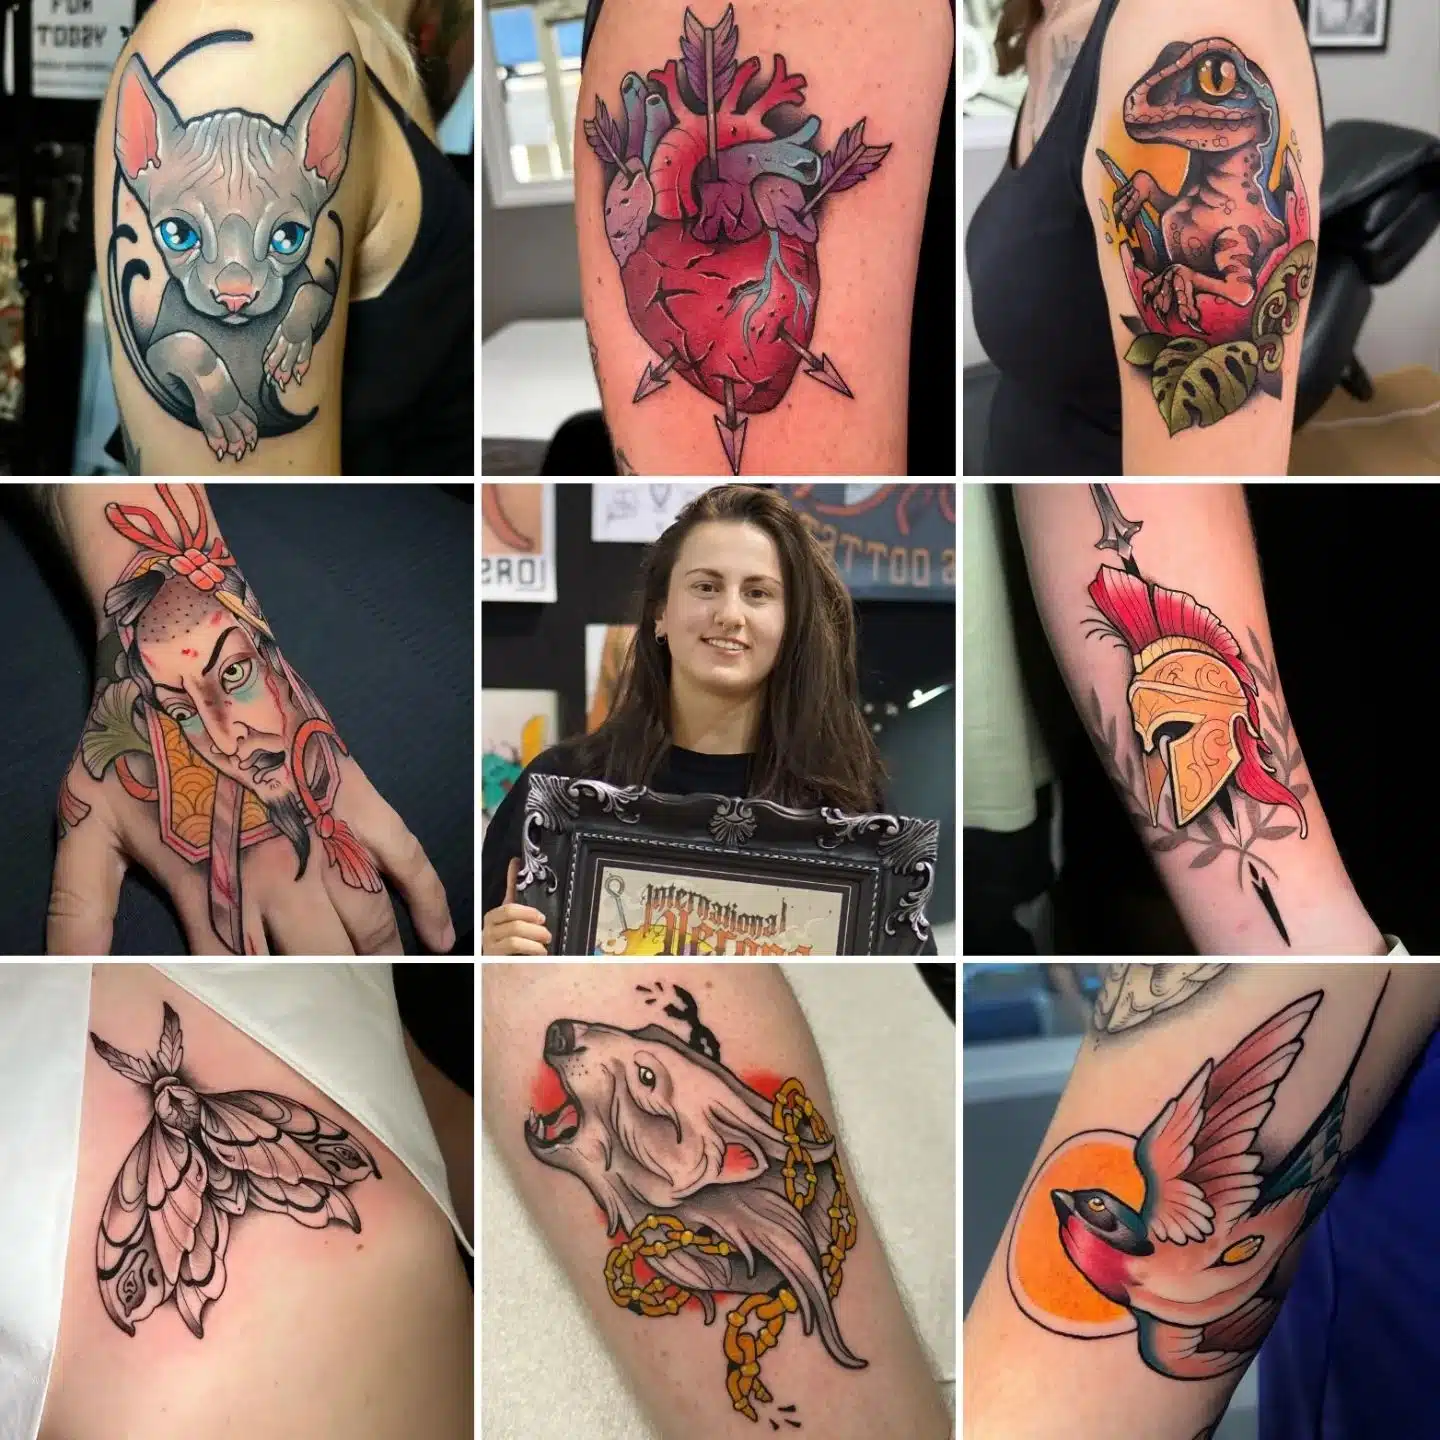 Our upcoming guest is Ainek! We are looking forward to hosting Ainek again from the 16th to 21st February. She is fully booked for these dates though as she is a returning guest we will likely have some more dates to share in the future. Looking forward to seeing you again!!!!
ainek_artattoo 

        